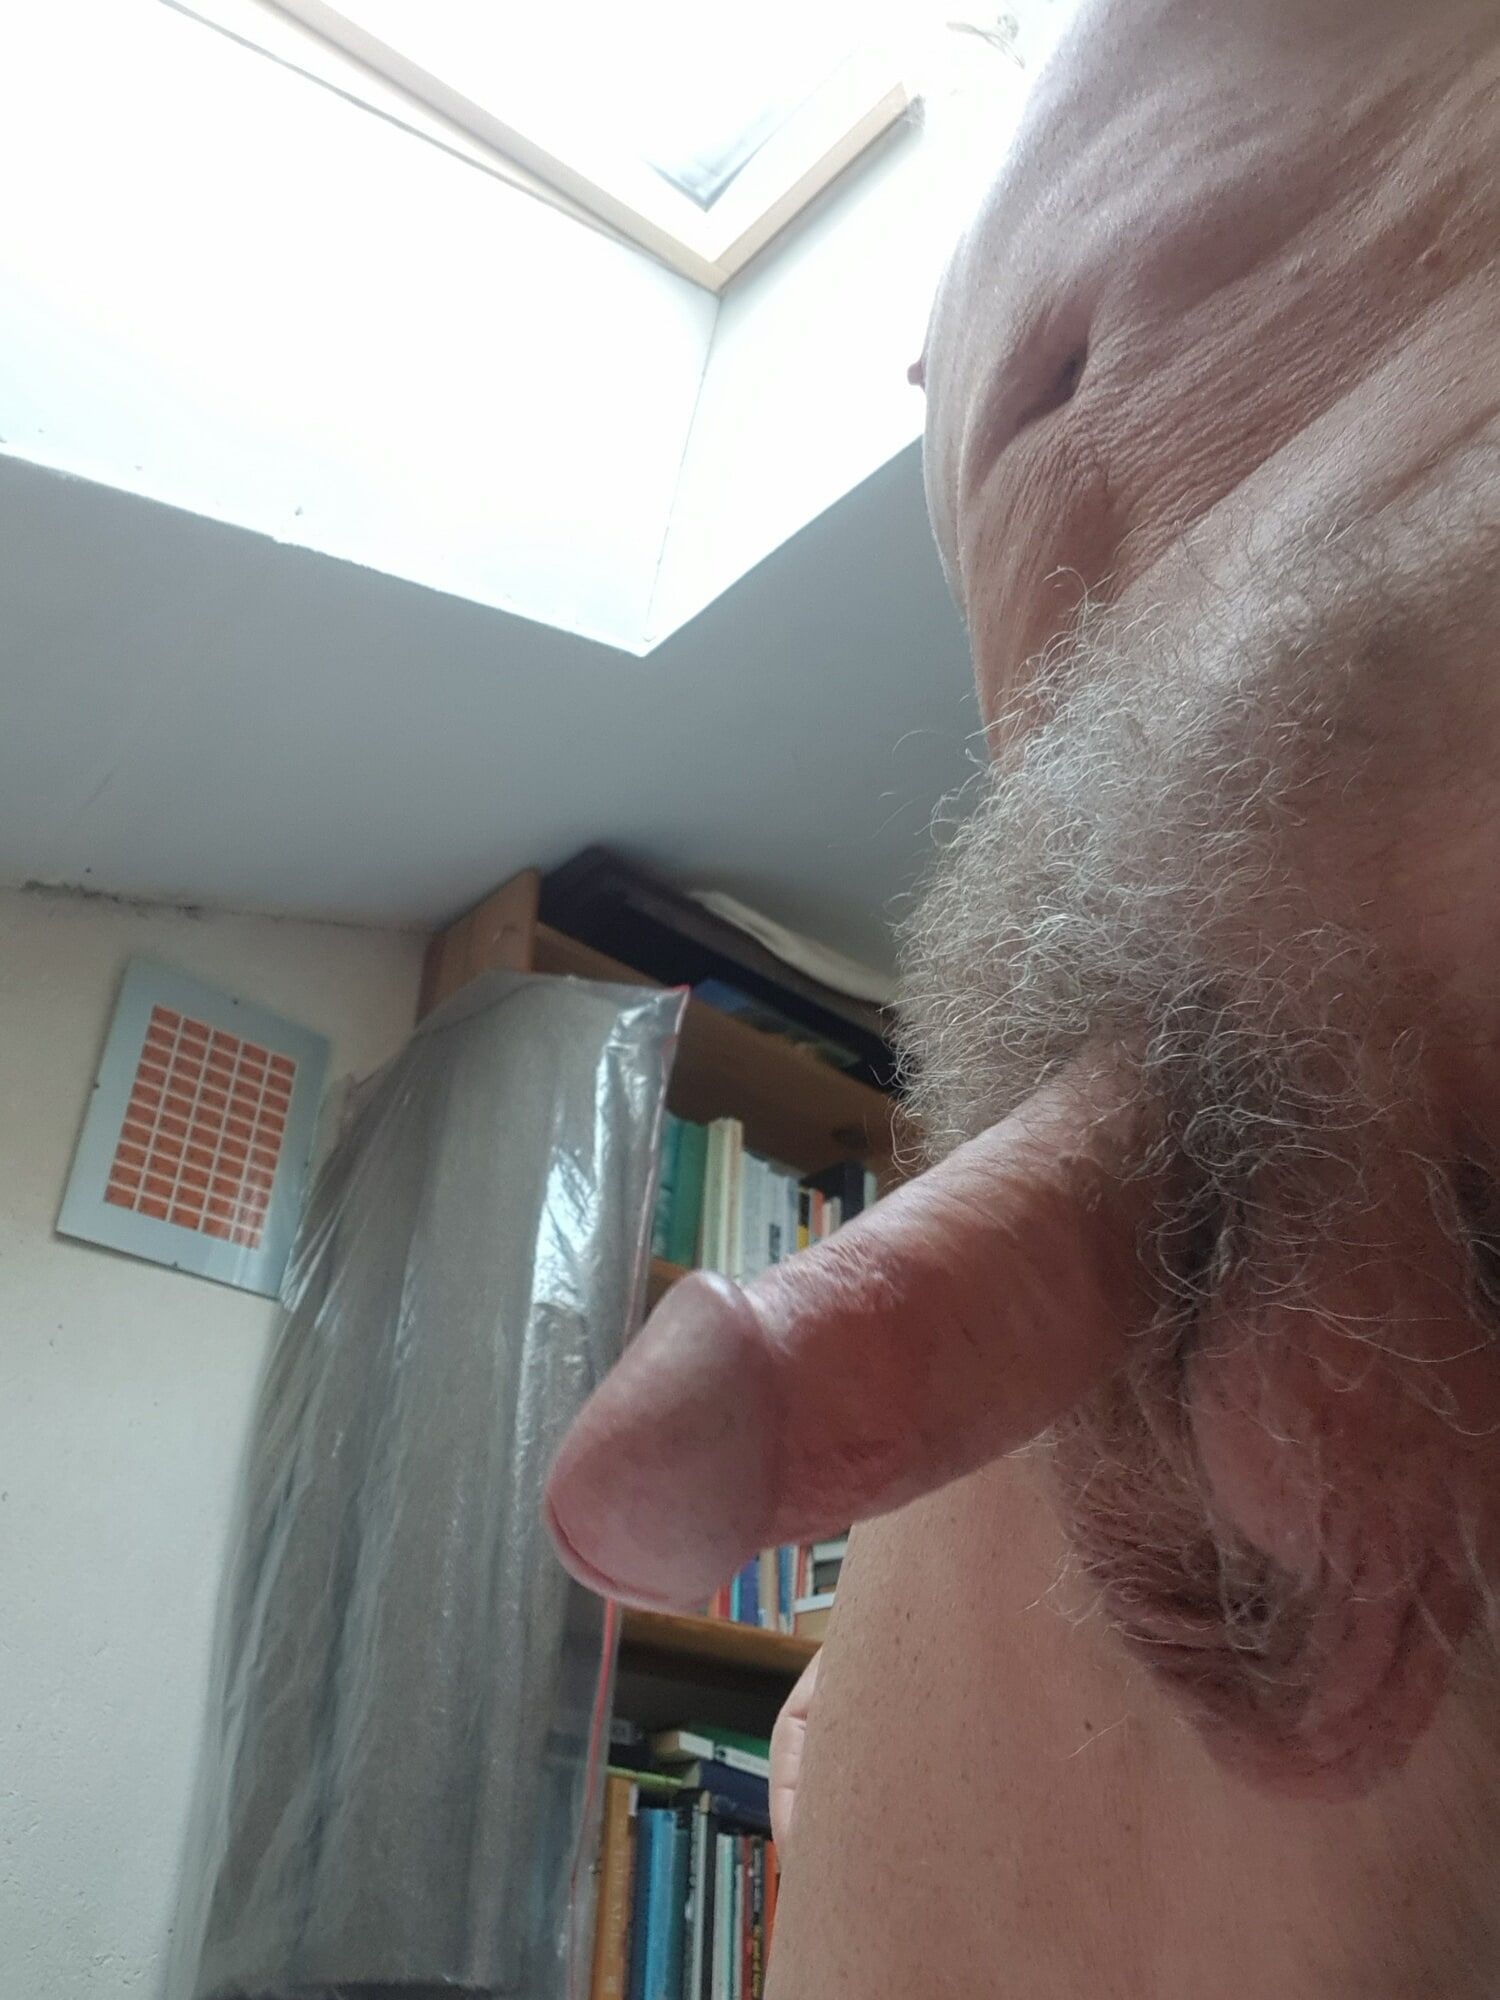 More of my cock #8